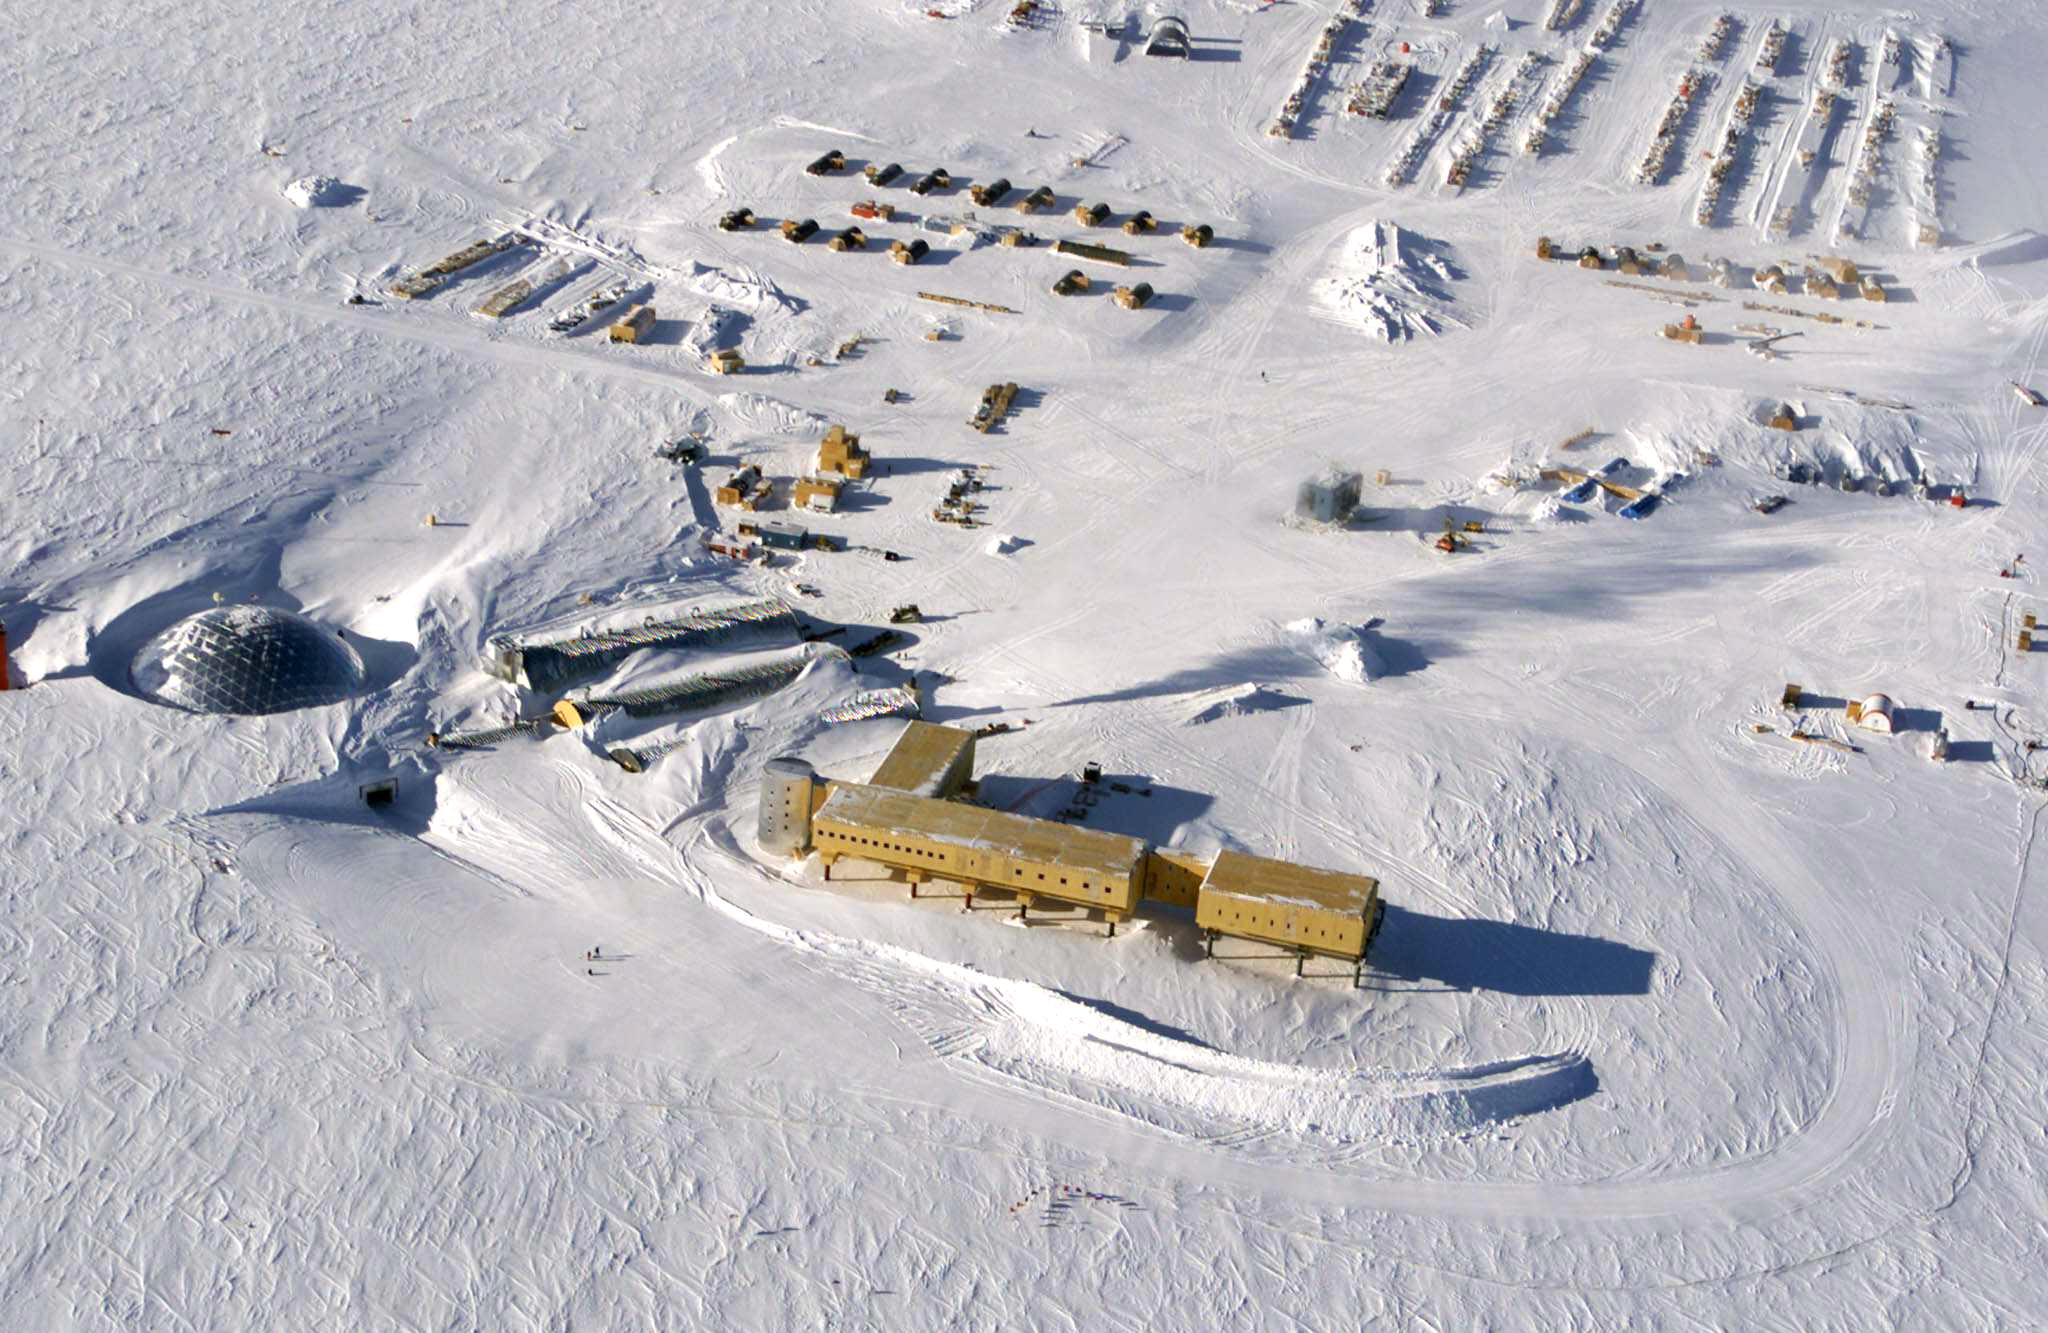 This handout photo dated 31 October 2002 shows an aerial view of the U.S. Amundsen-Scott South Pole Station in Antarctica. (David McCarthy—AFP/Getty Images)